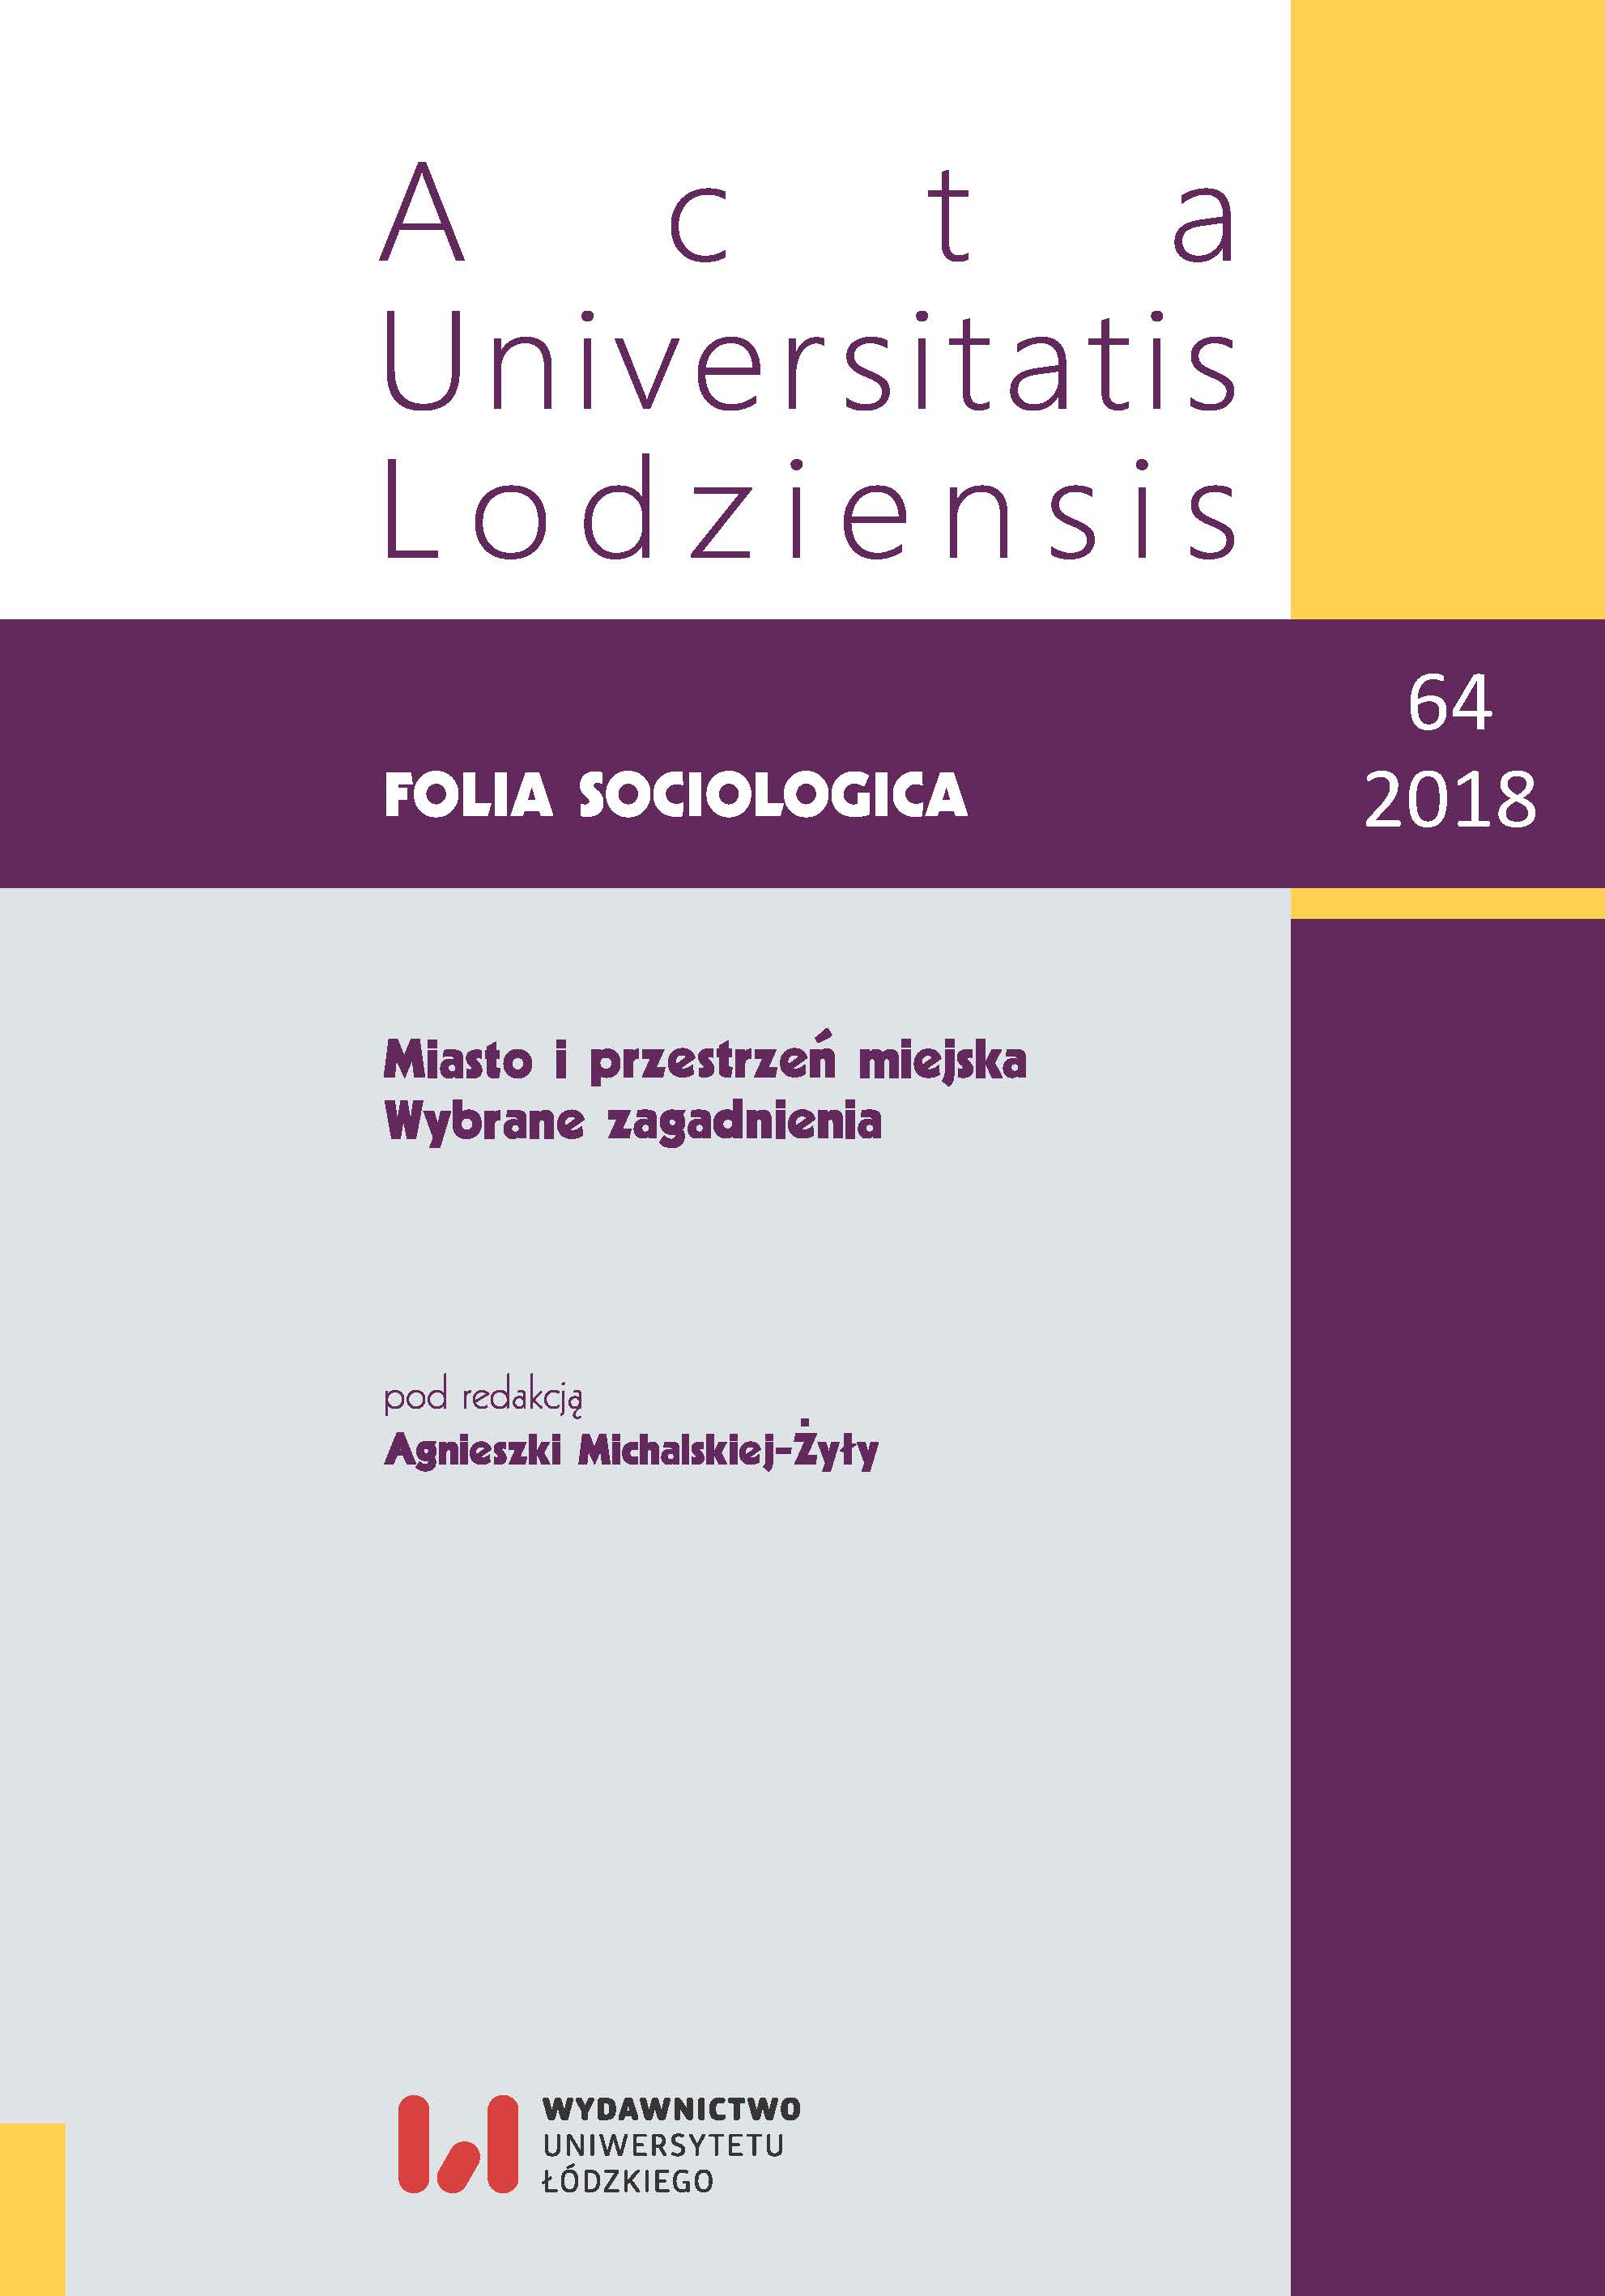 Foreigners in Wrocław Cover Image